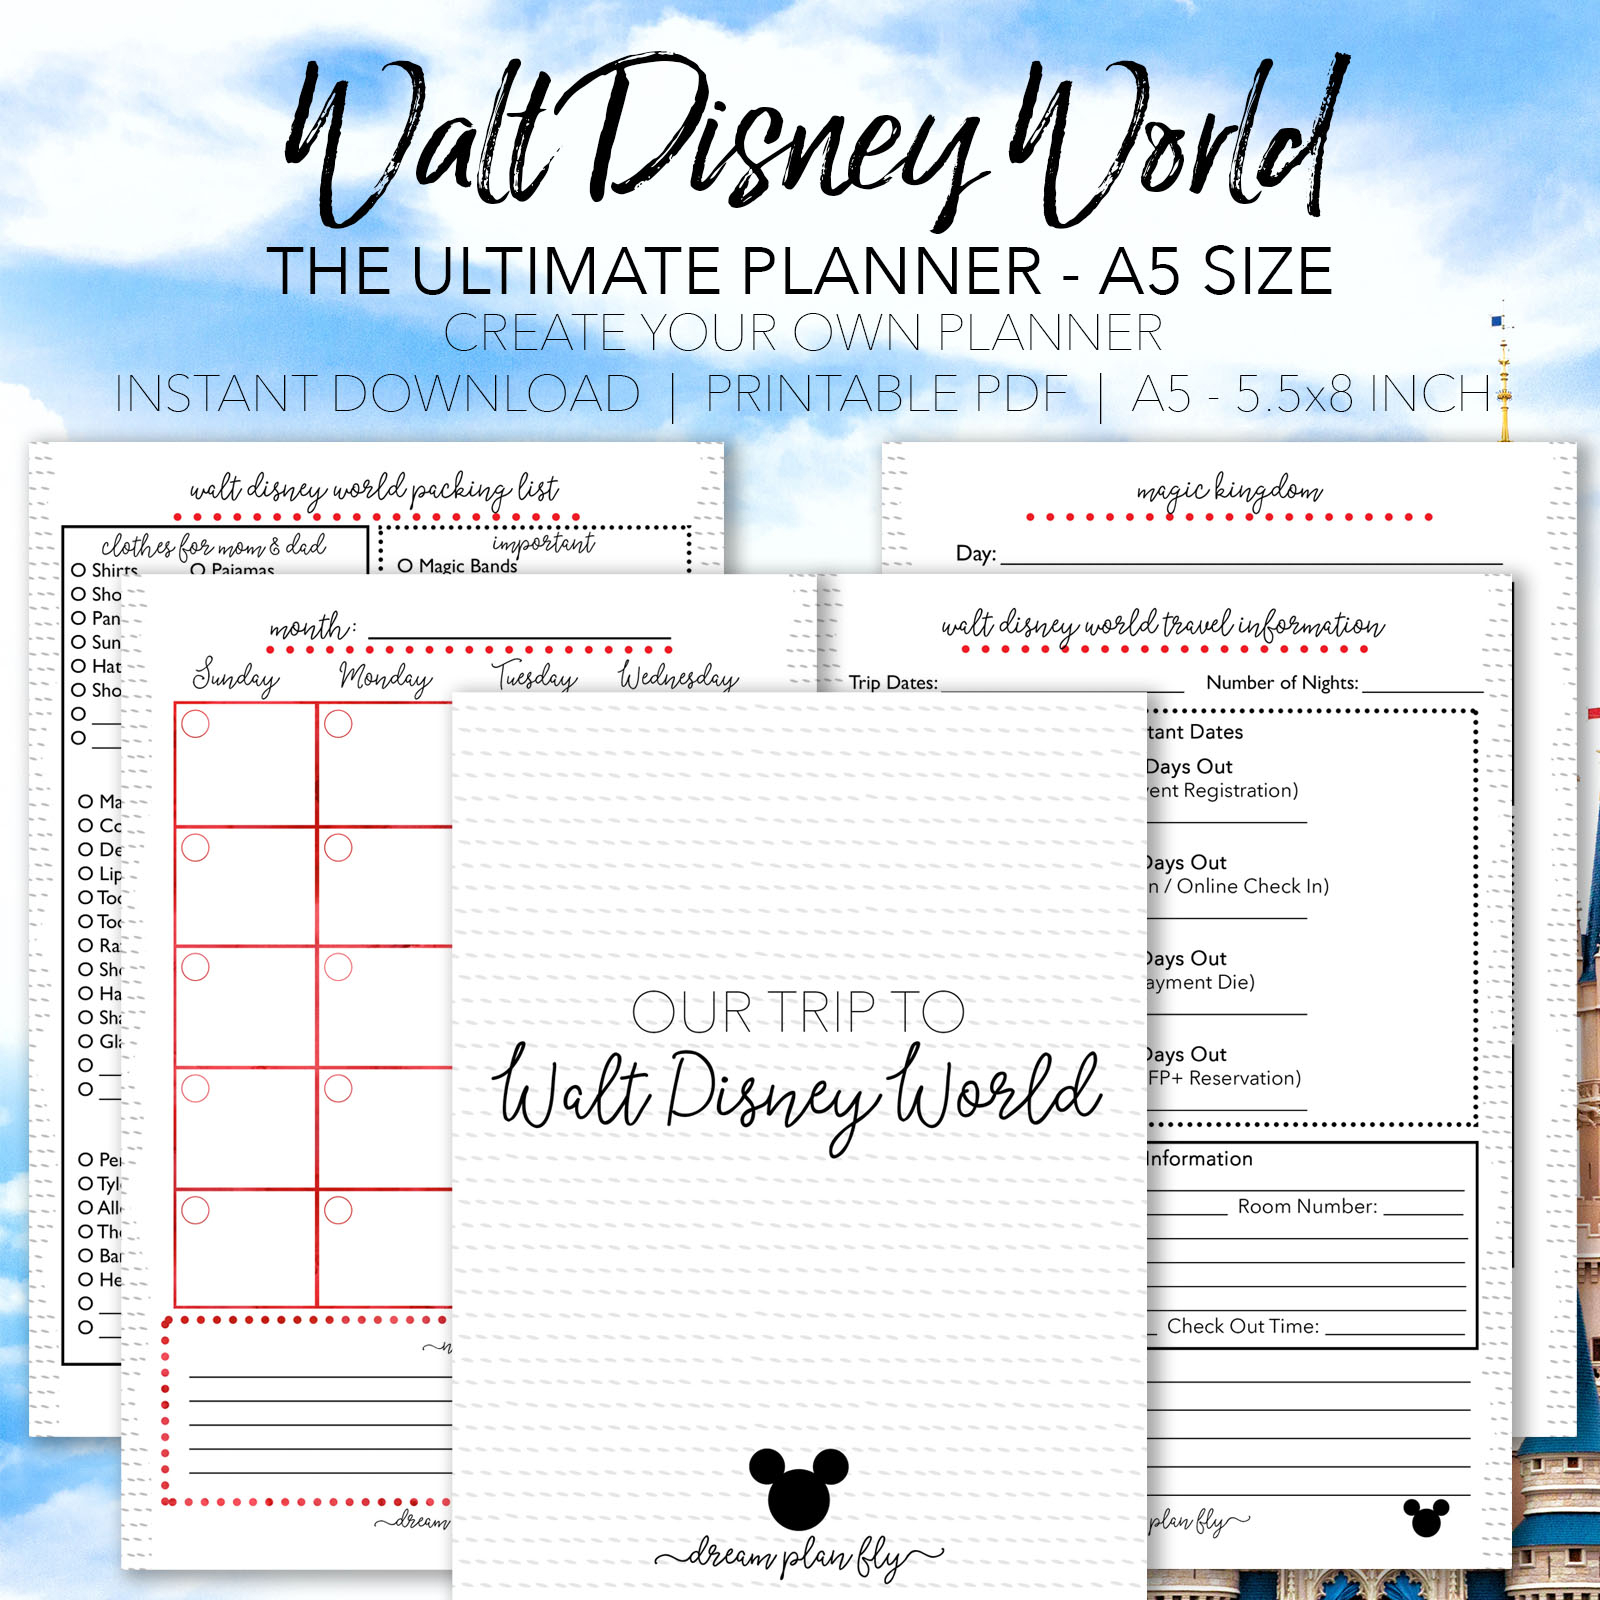 Ultimate Walt Disney World Vacation Planner - A5 Size